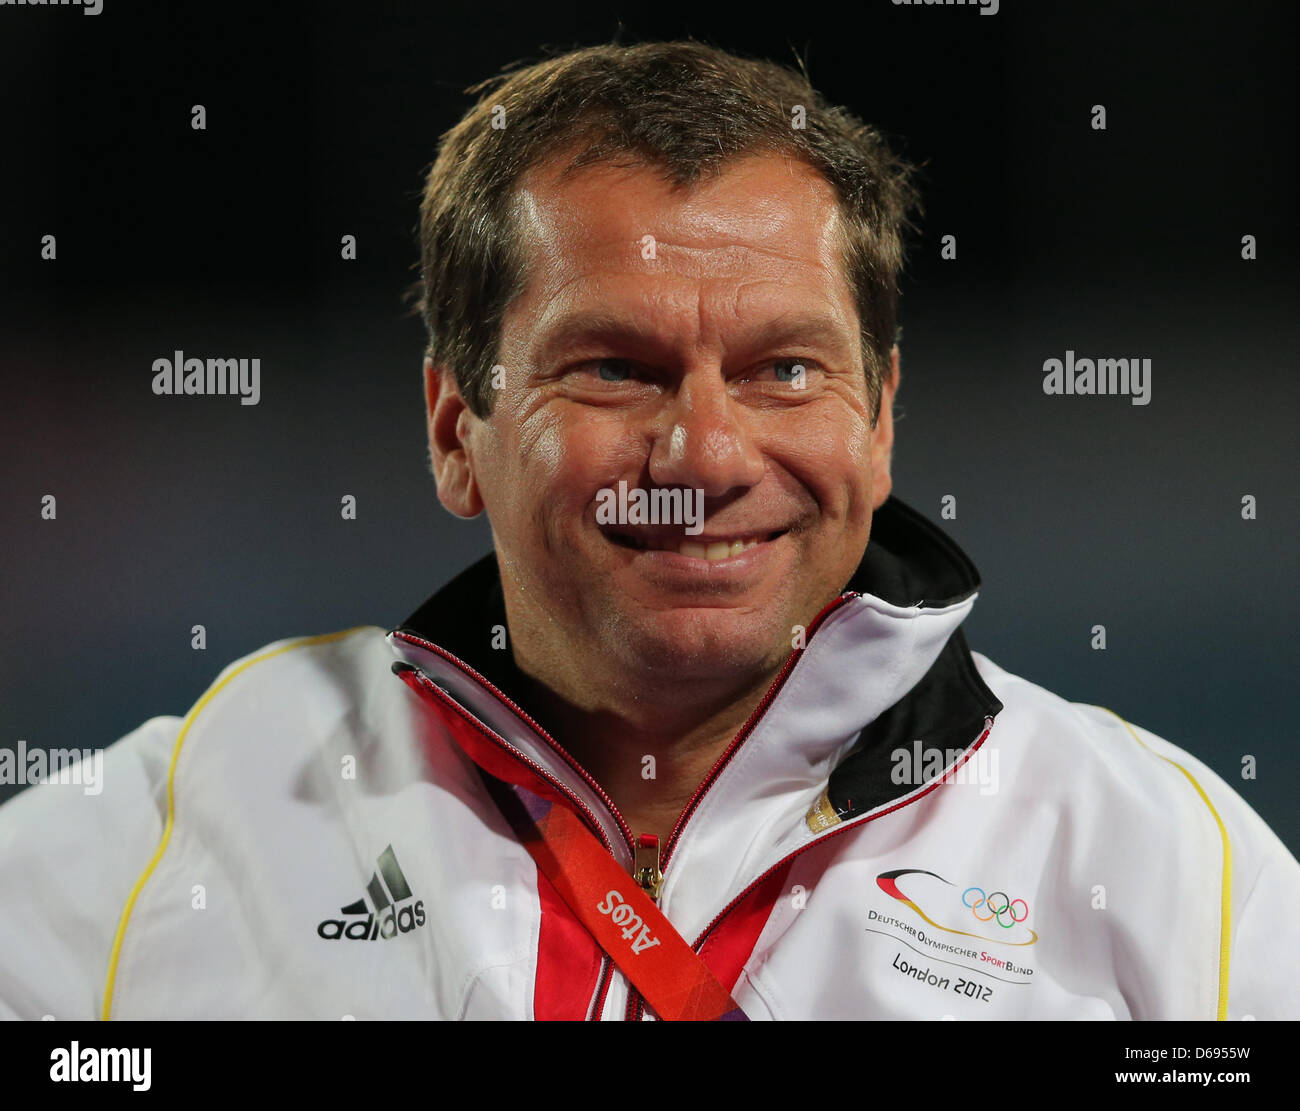 Michael Behrmann, head coach of the German field hockey Women team, smiles after winning against the United States during women's field hockey at Olympic Park Riverbank Arena for the London 2012 Olympic Games Field Hockey competition in London, Britain, 29 July 2012. Photo: Christian Charisius  +++(c) dpa - Bildfunk+++ Stock Photo